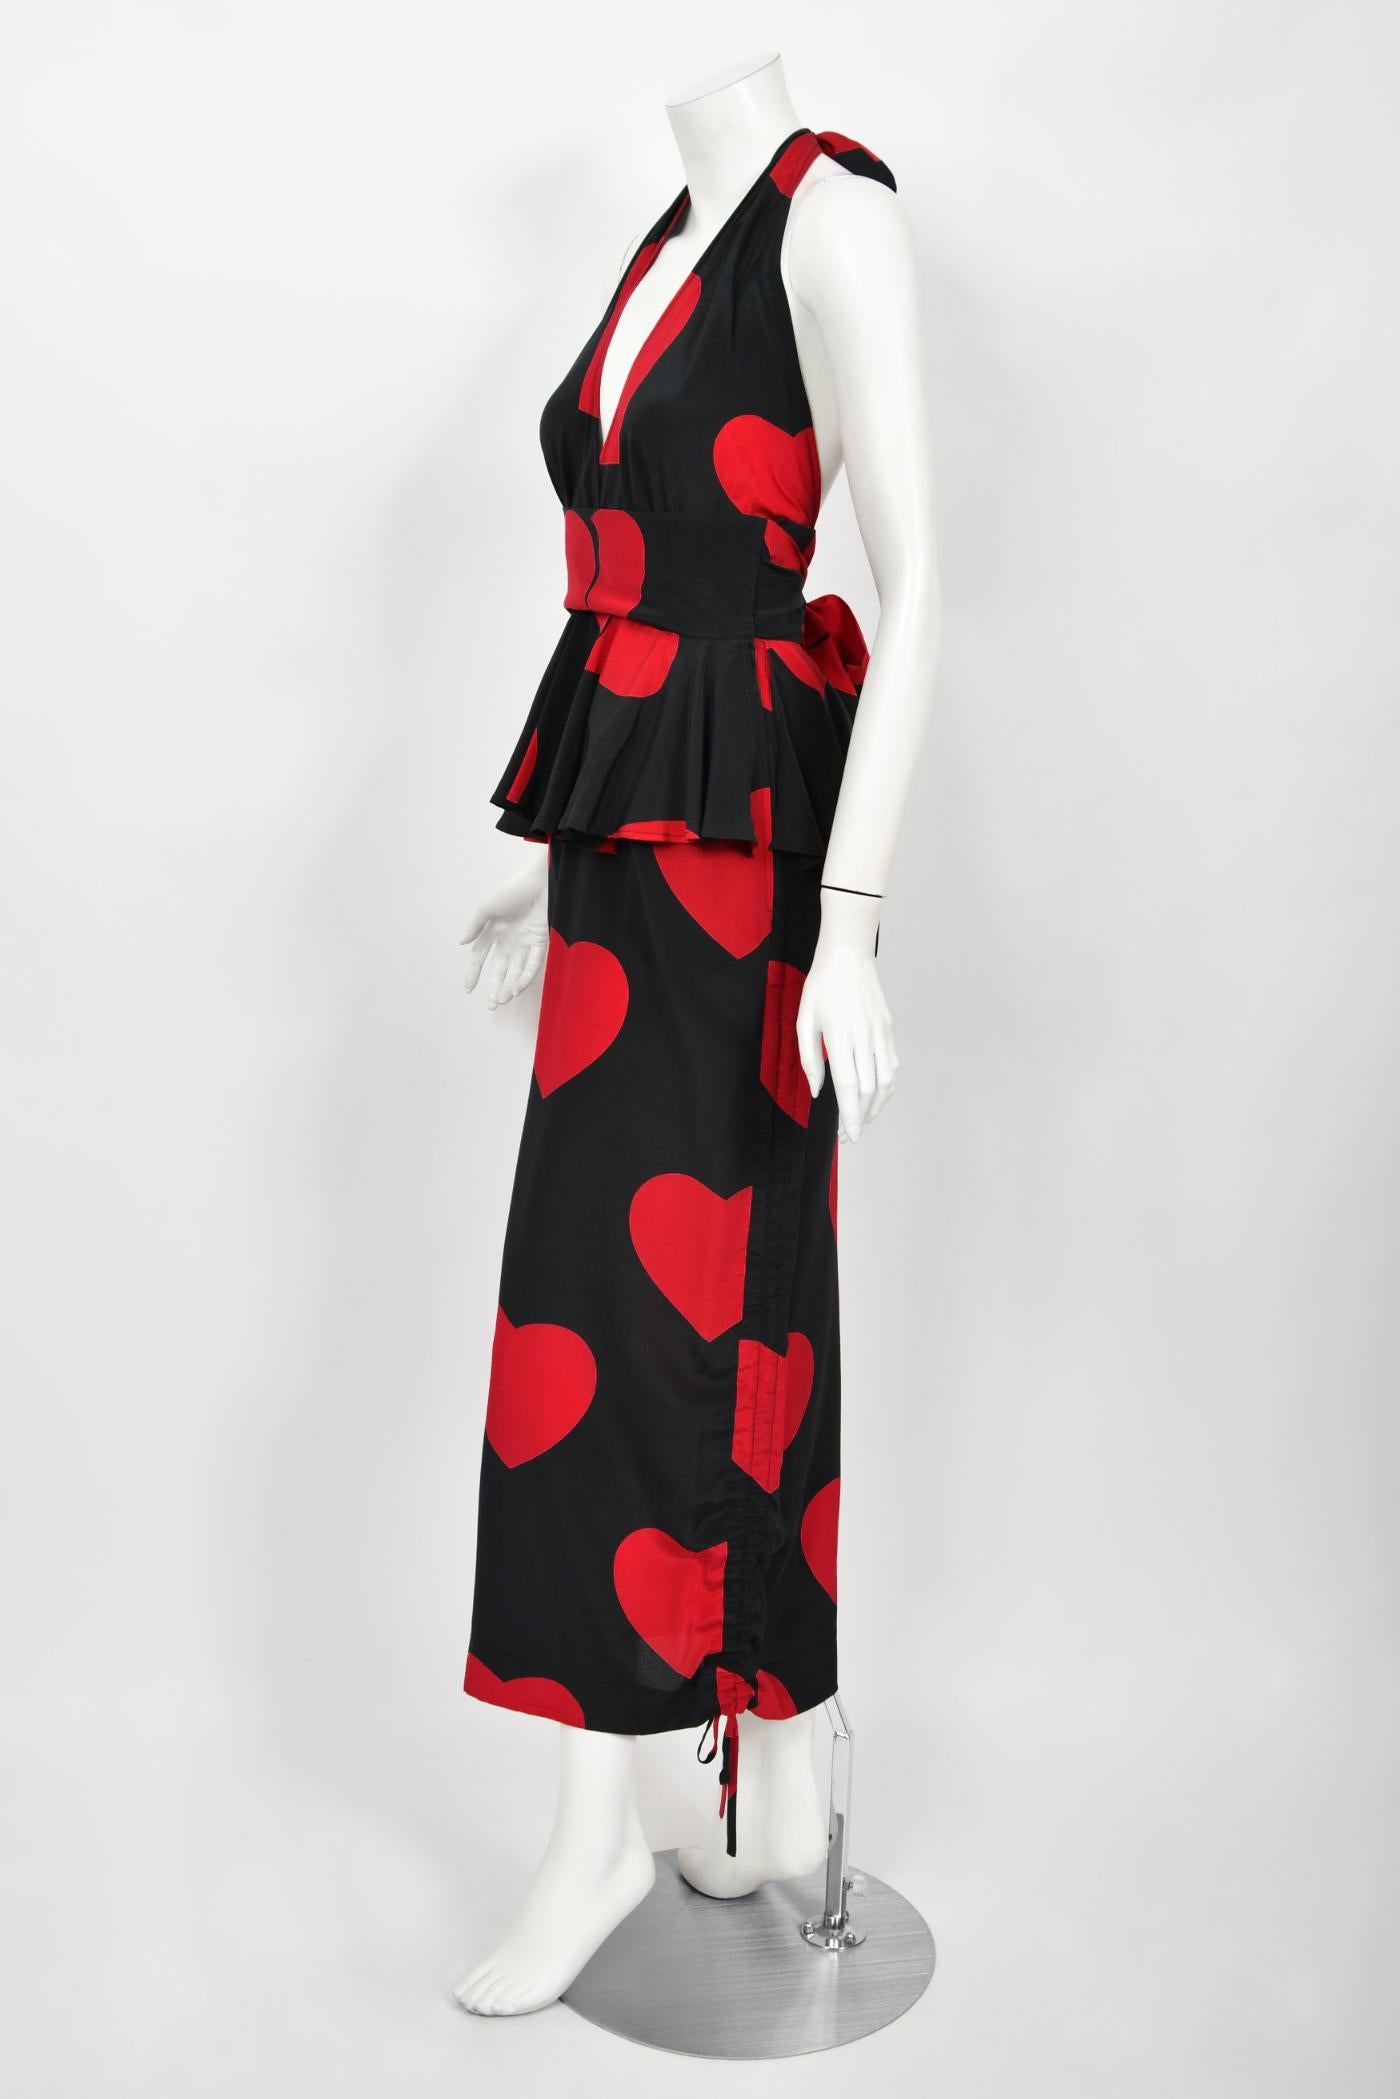 1994 Moschino Couture Documented 'Heartbreaker' Print Silk Convertible Dress  For Sale 10